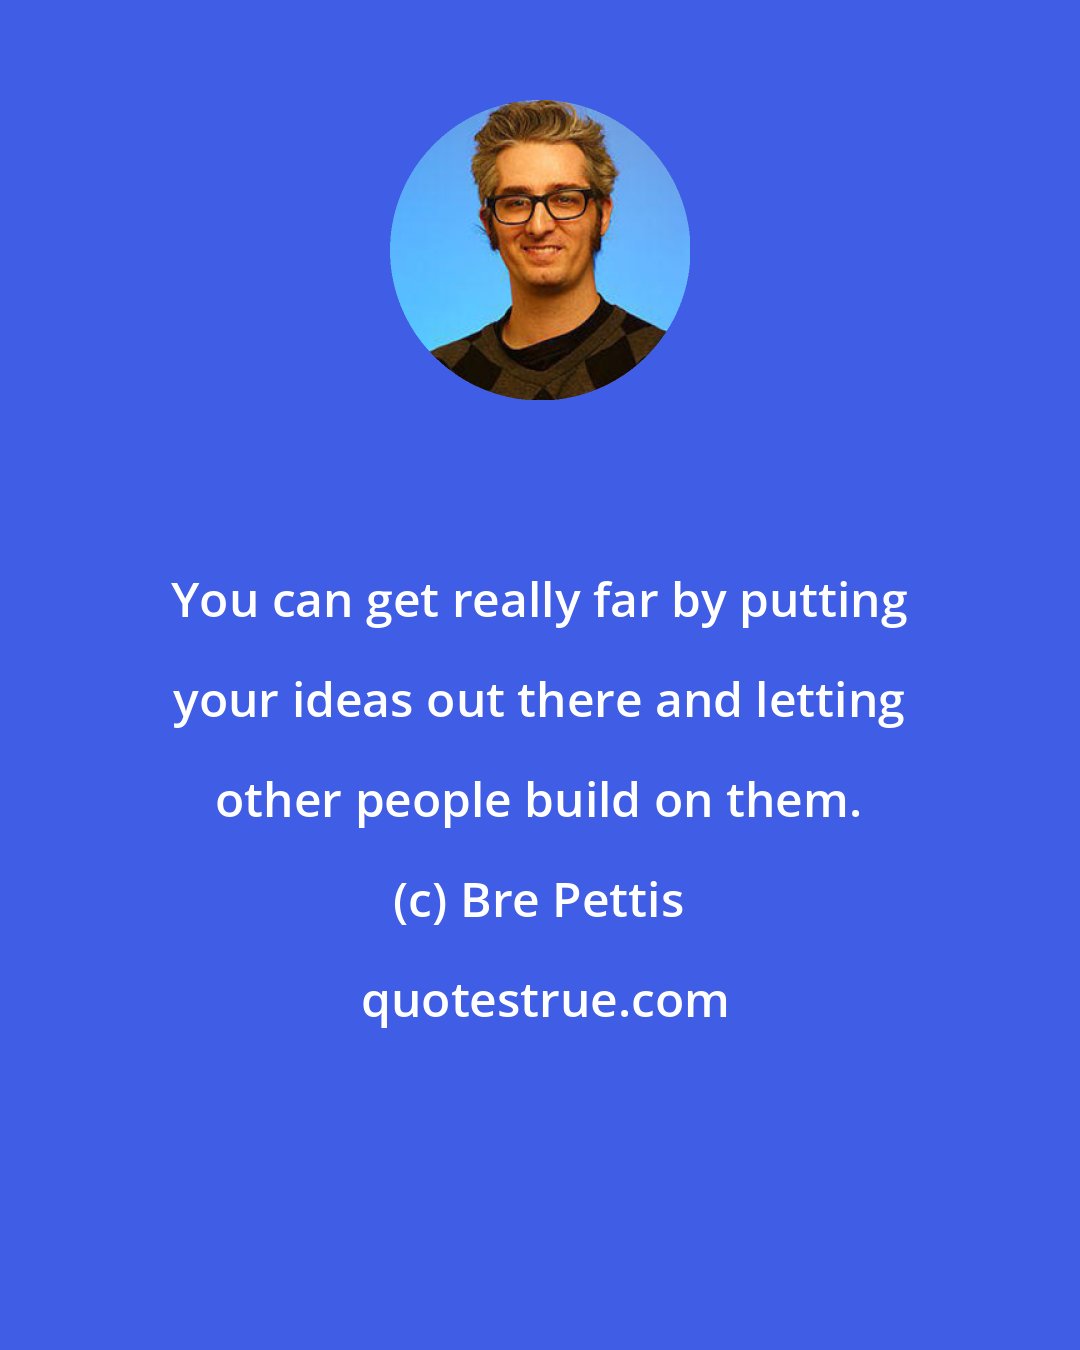 Bre Pettis: You can get really far by putting your ideas out there and letting other people build on them.